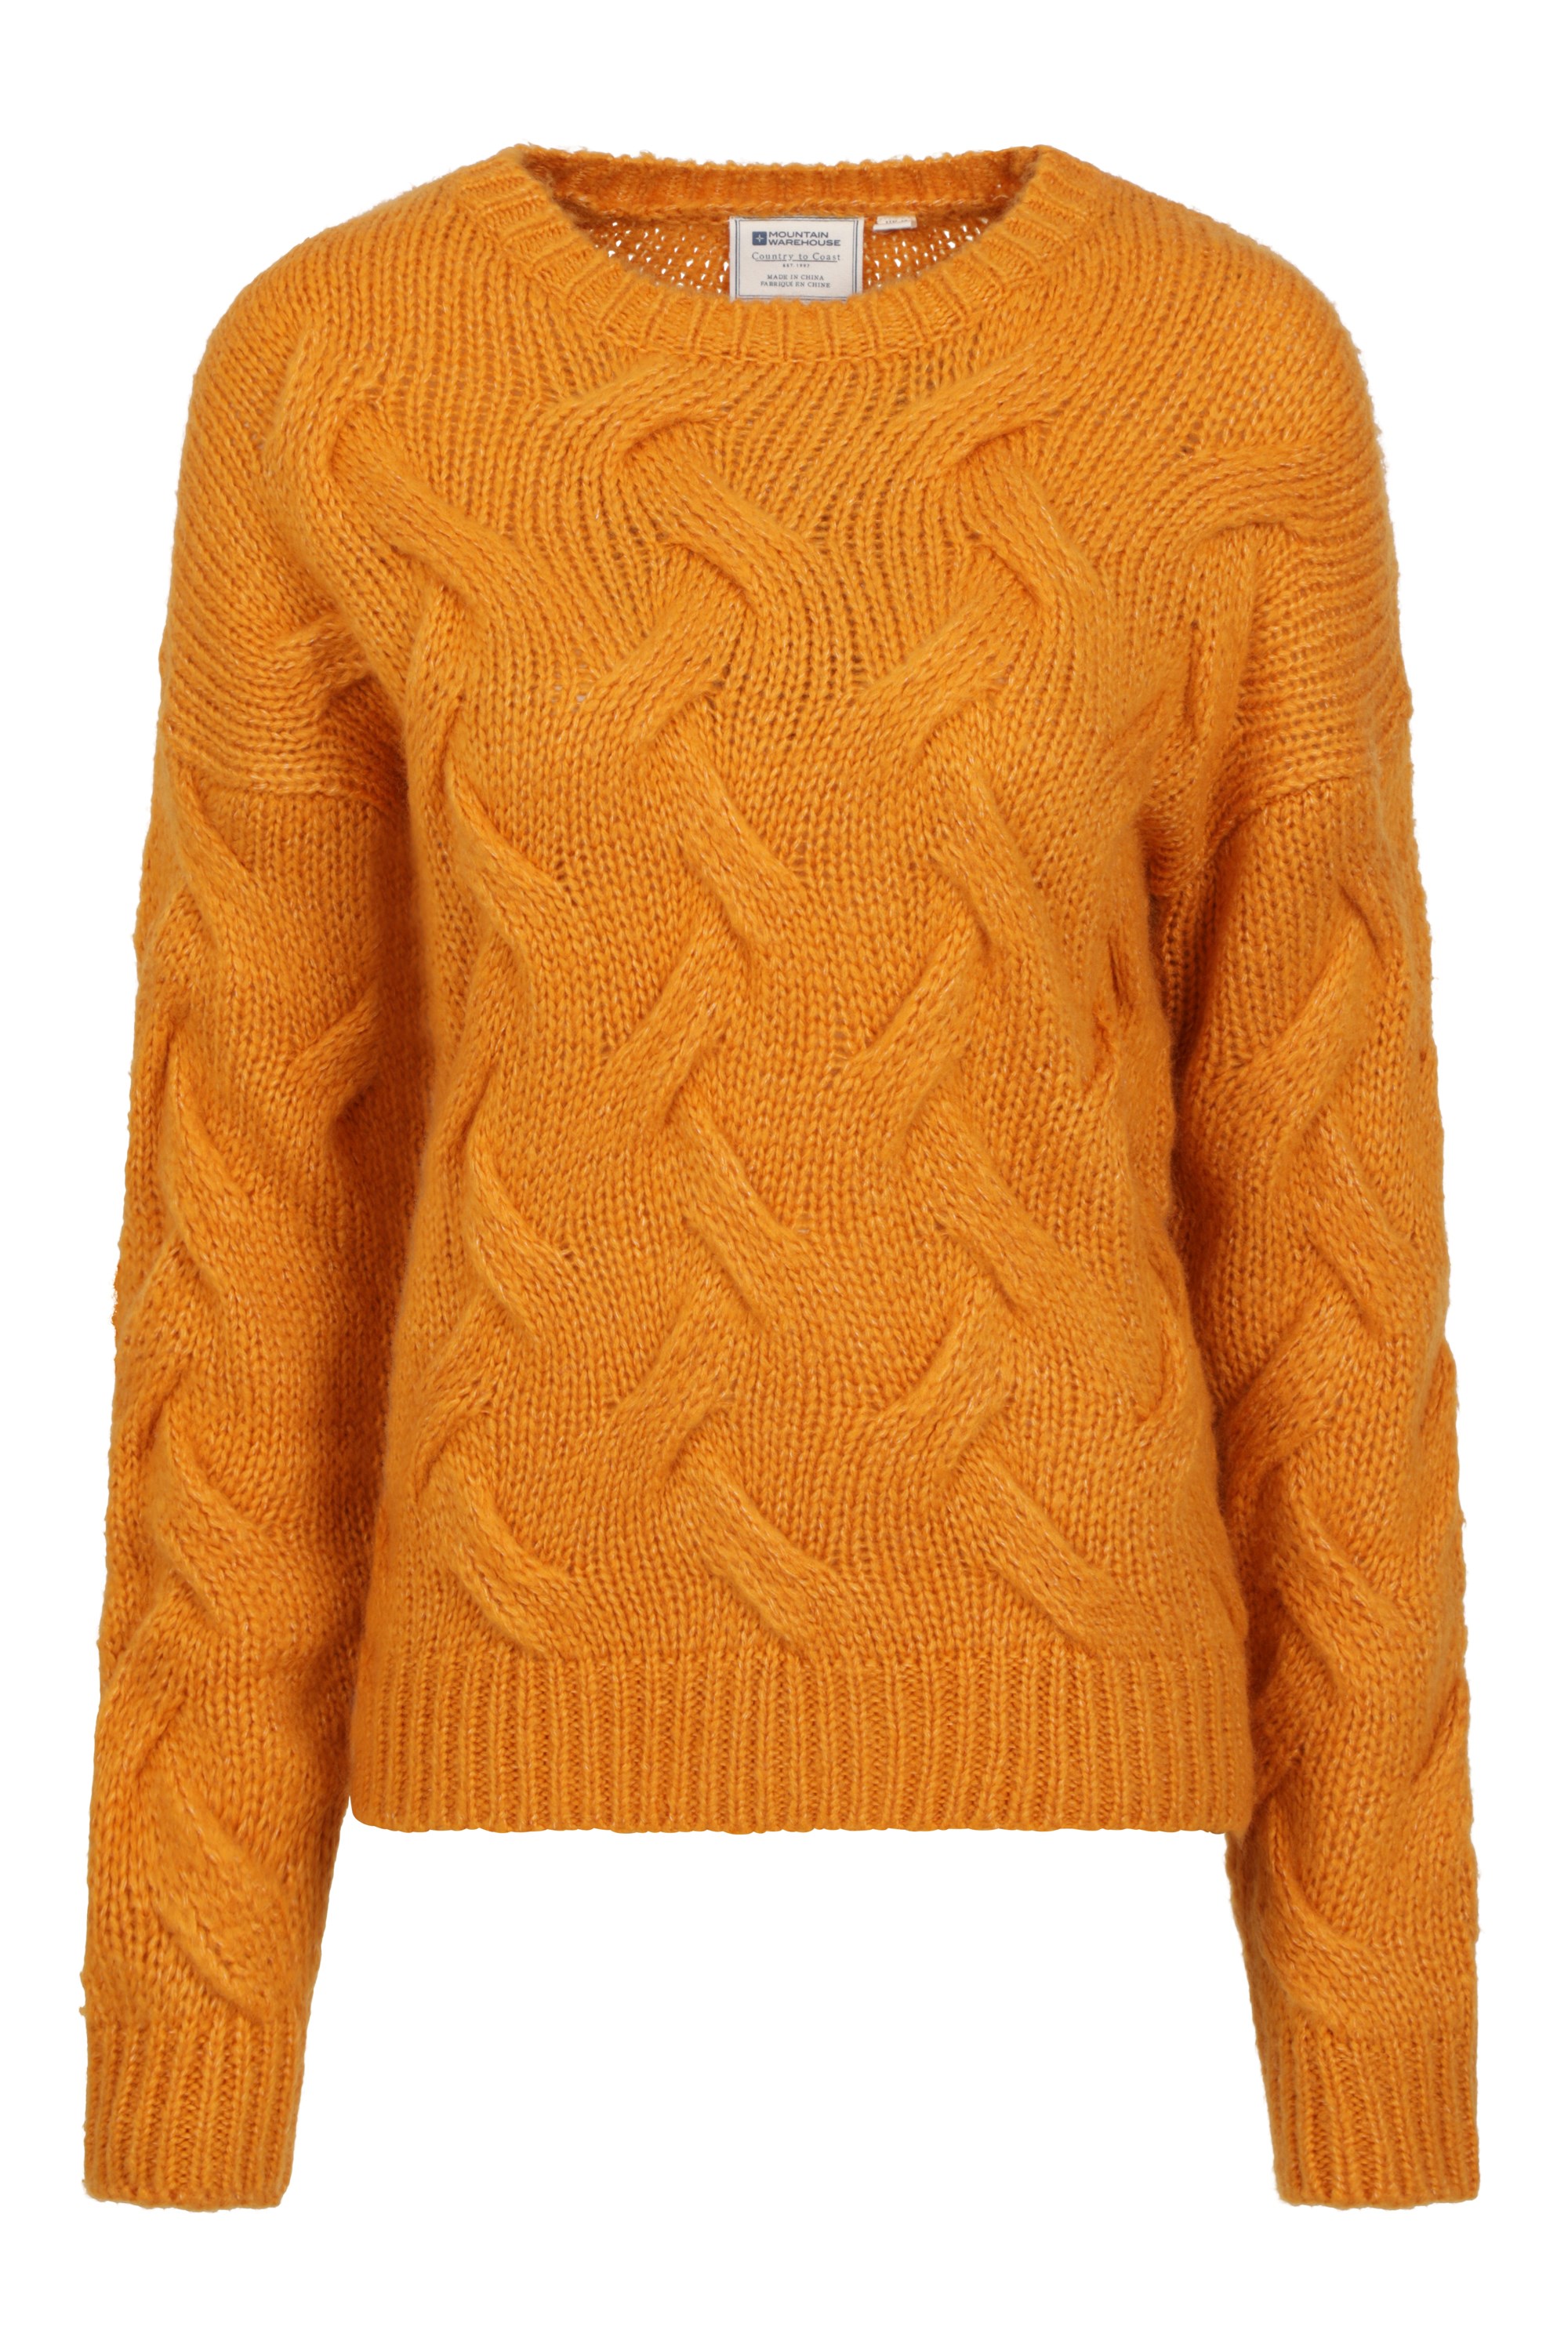 Austria Womens Cable Knit Jumper - Yellow